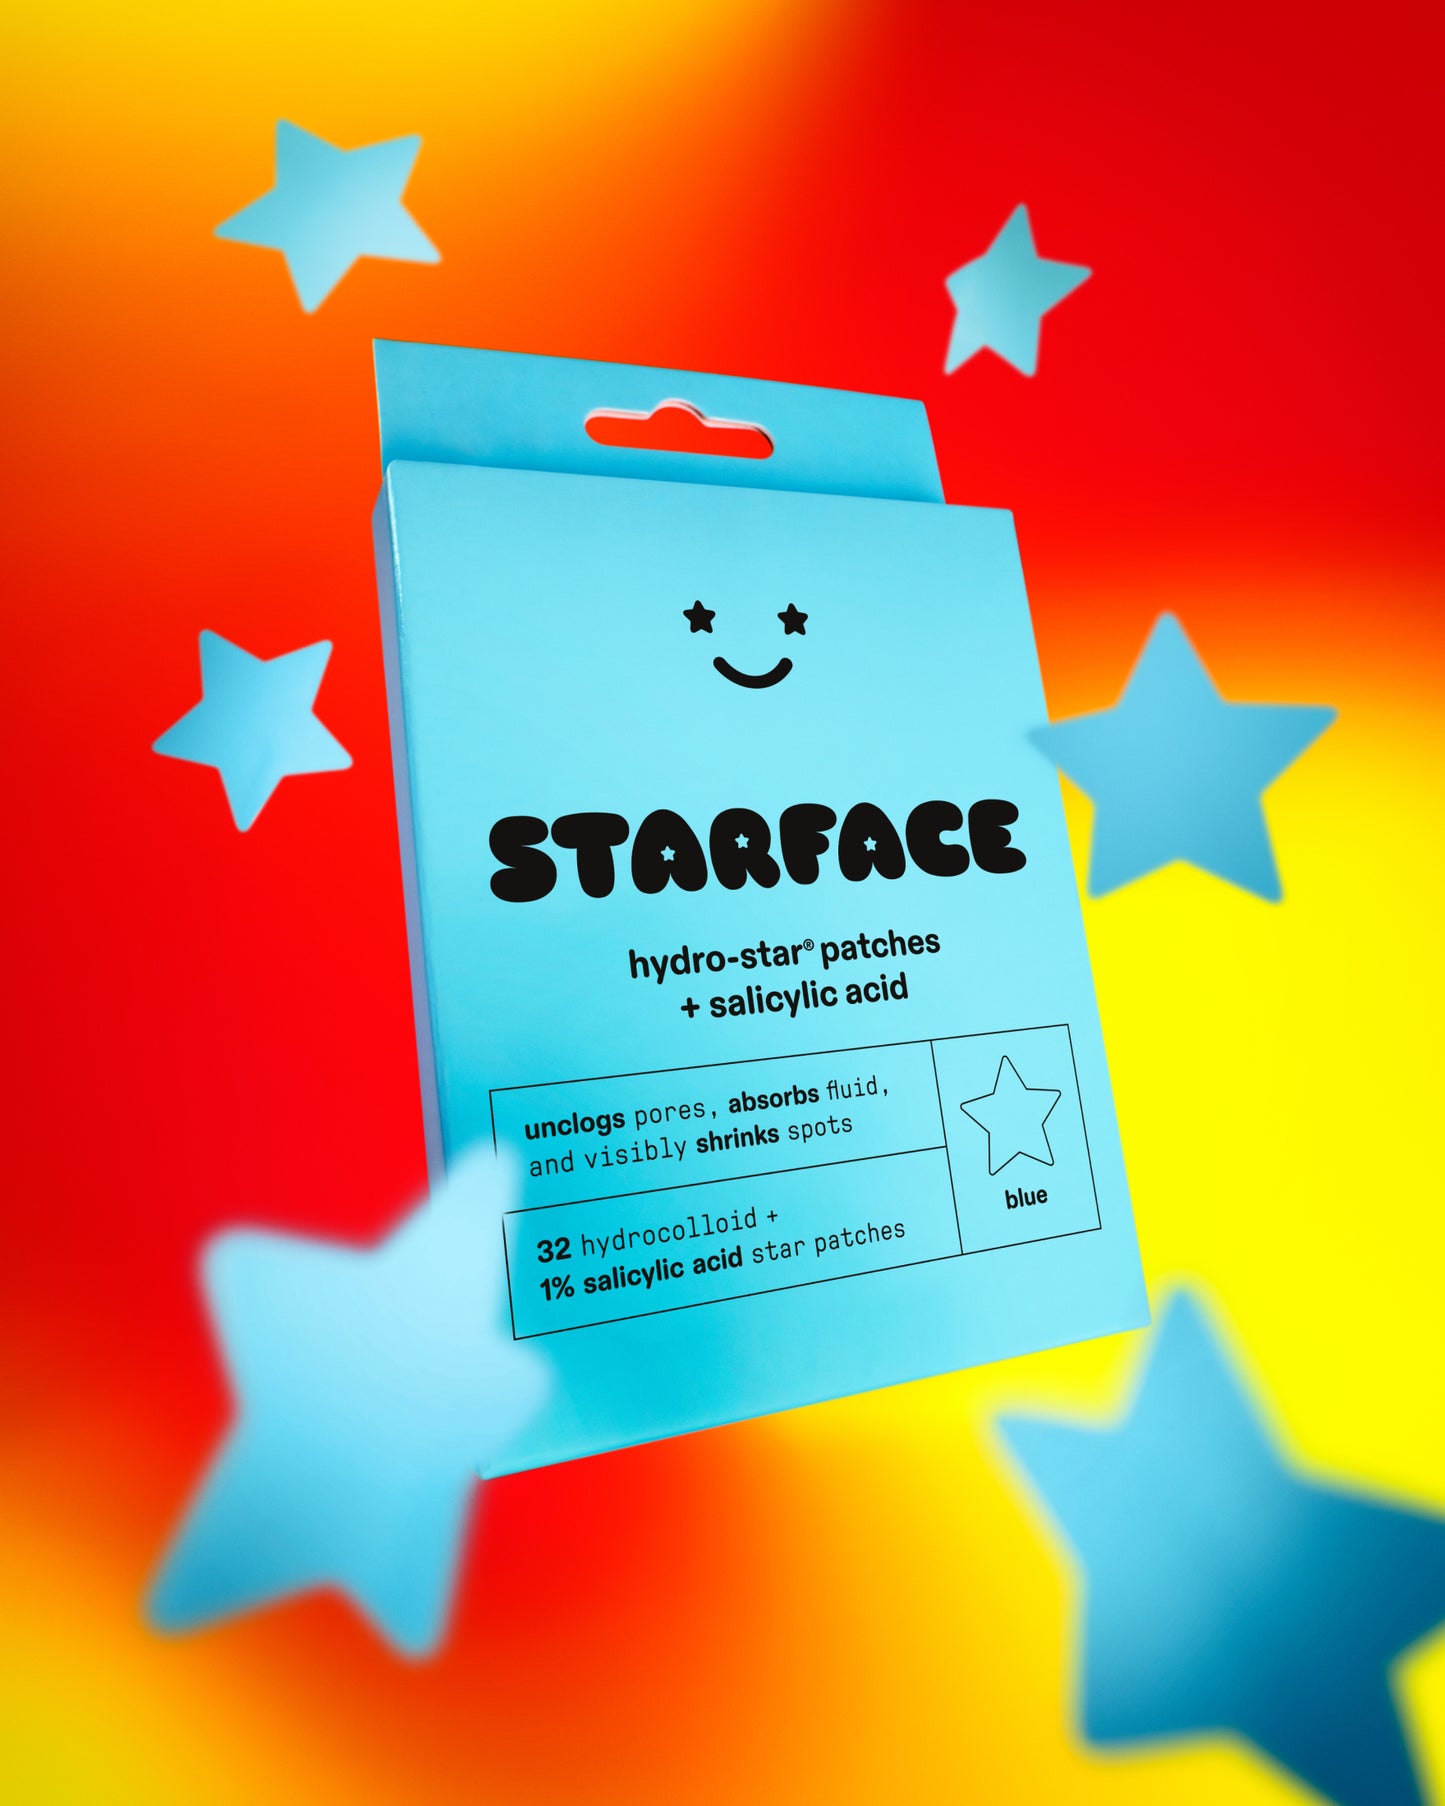 A blue package of Hydro-Star® + Salicylic Acid pimple patches on a red and yellow background with floating blue stars.